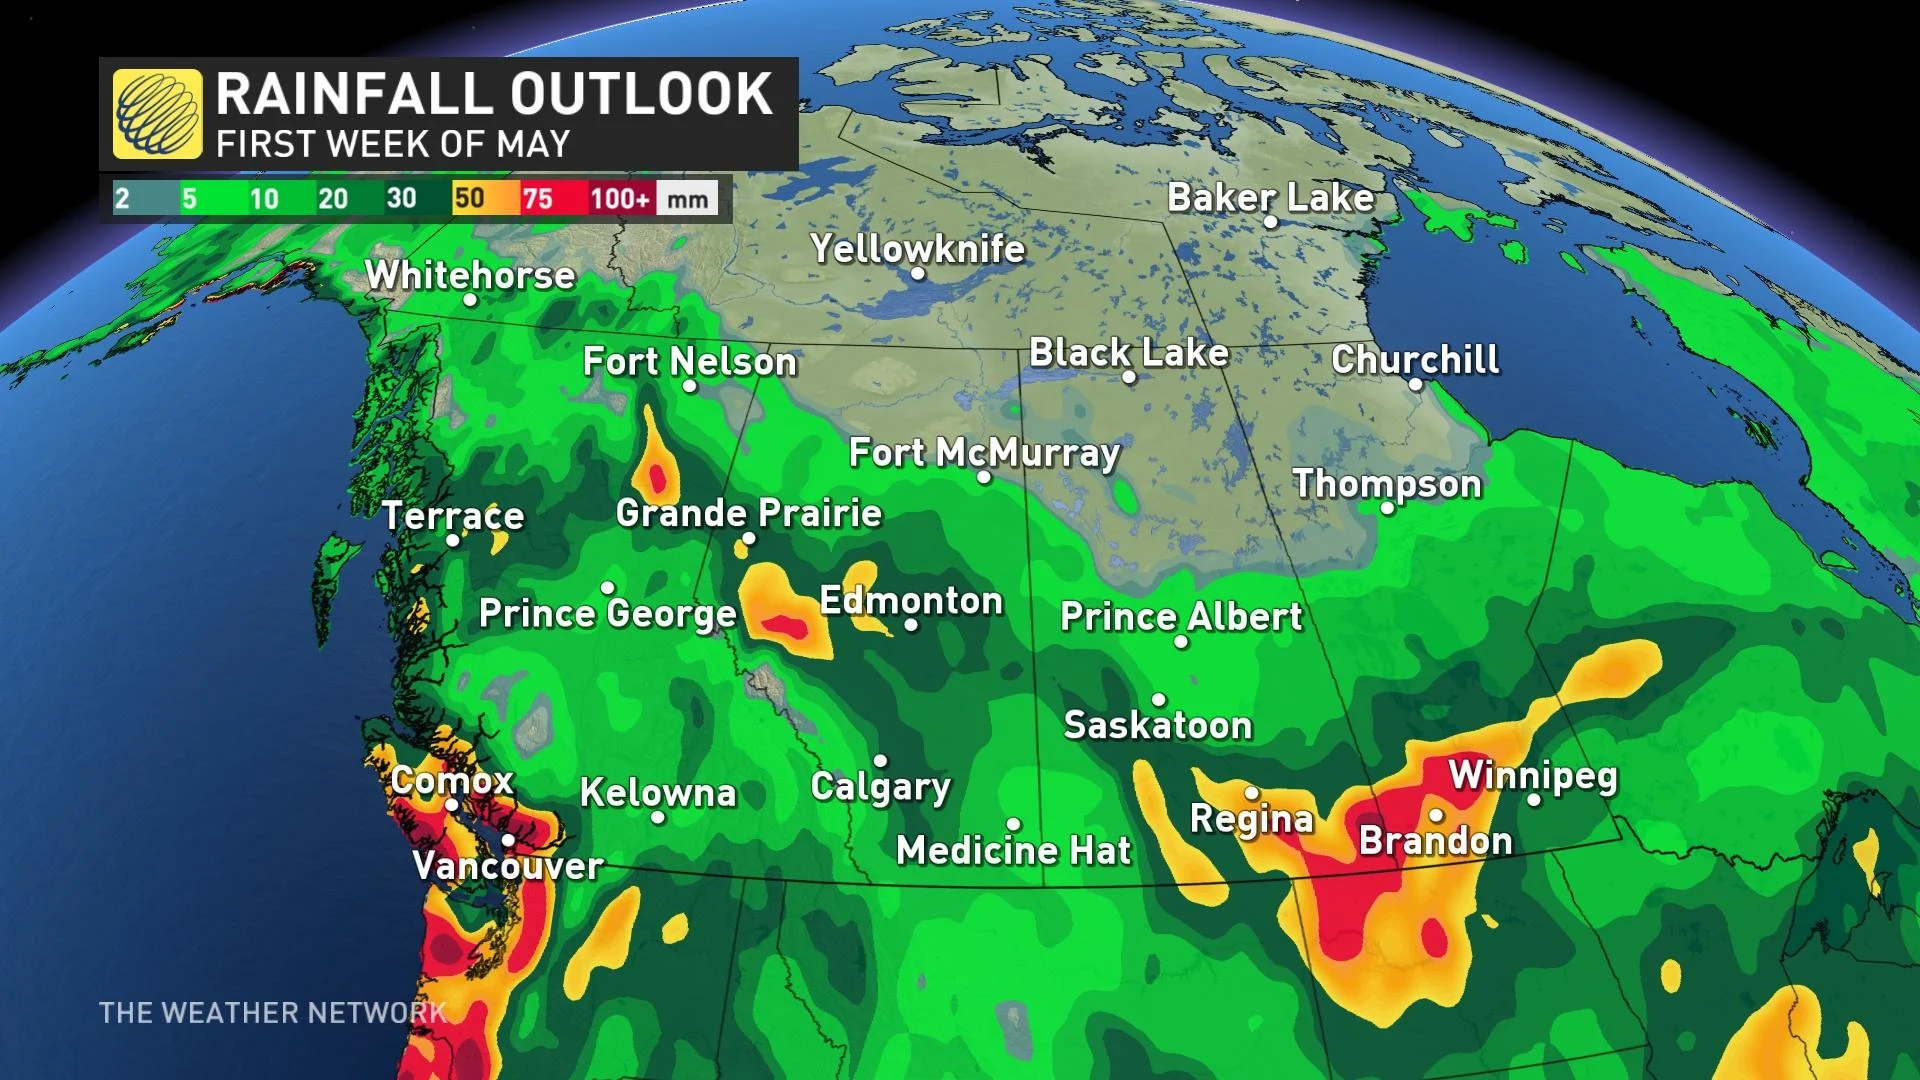 Western Canada rainfall outlook for first week of May